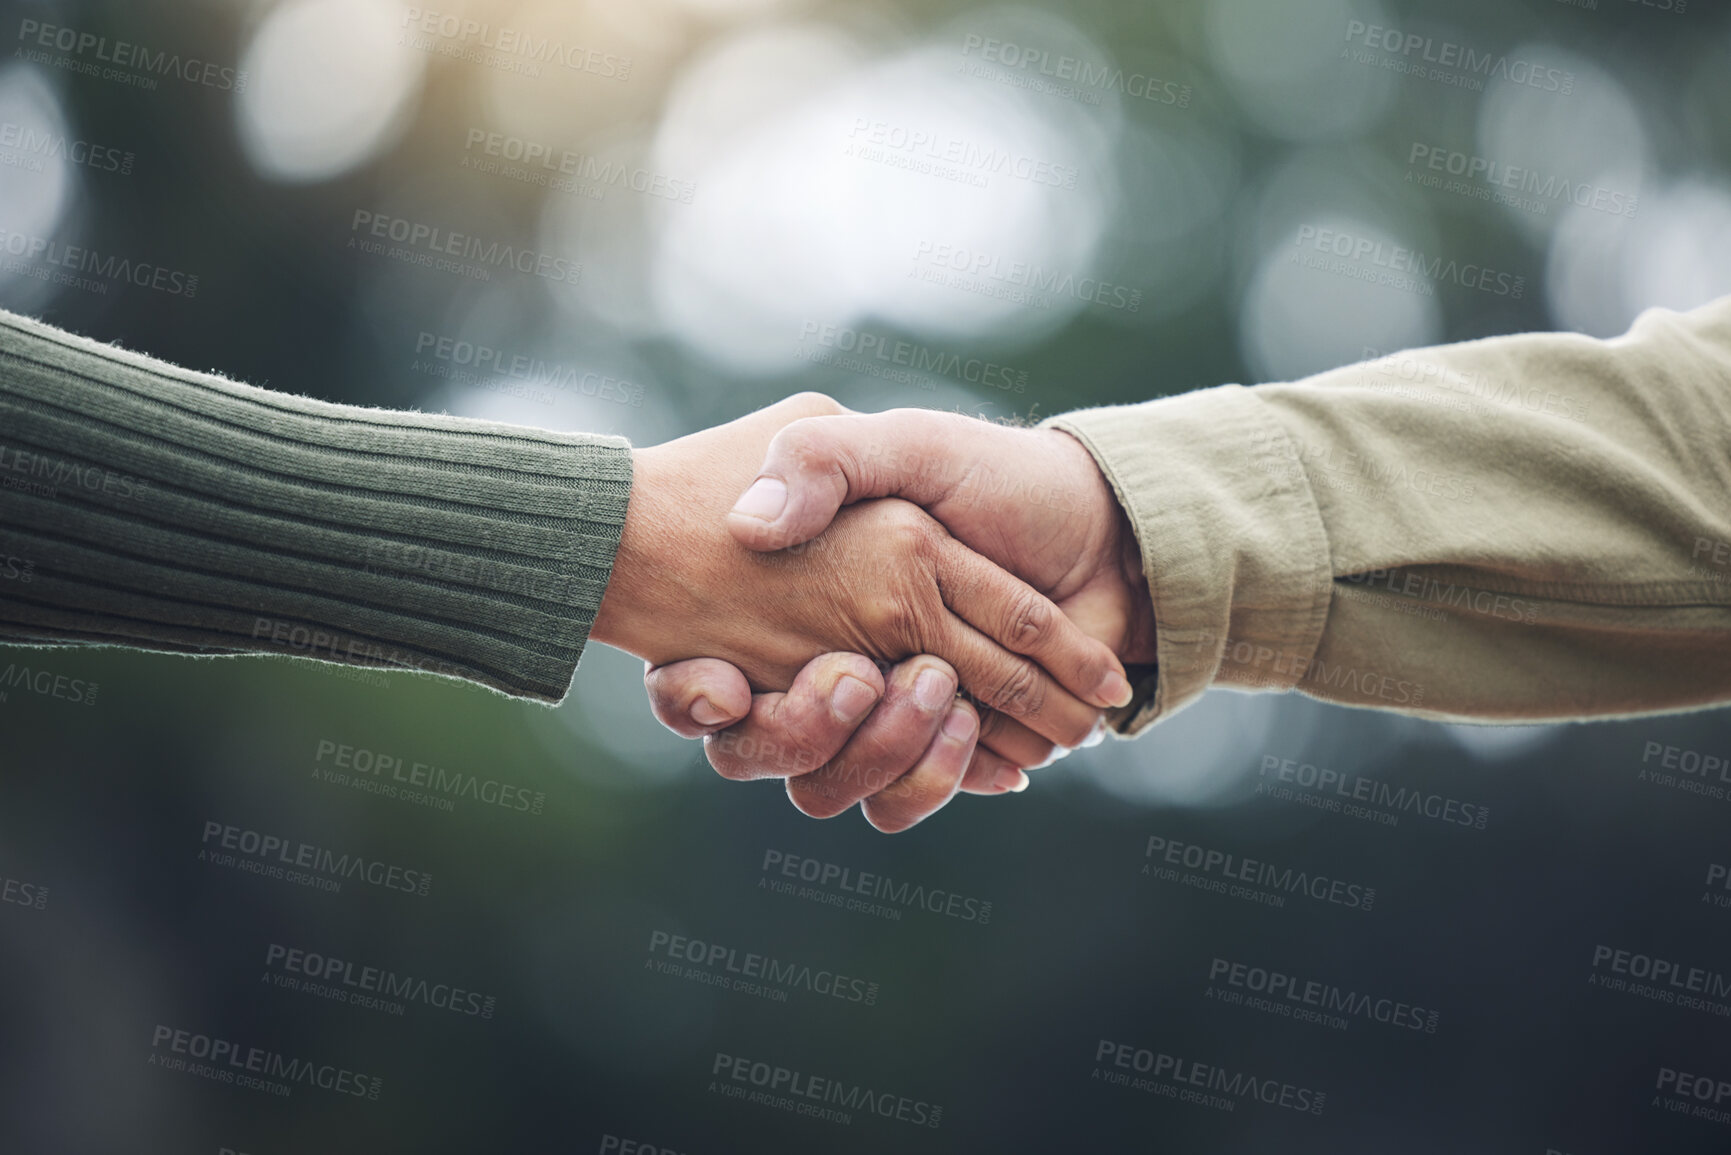 Buy stock photo Shaking hands, senior man and people together in partnership, greeting or welcome with trust, bonding or moment in nature on blurred background. Handshake, support and solidarity with a person